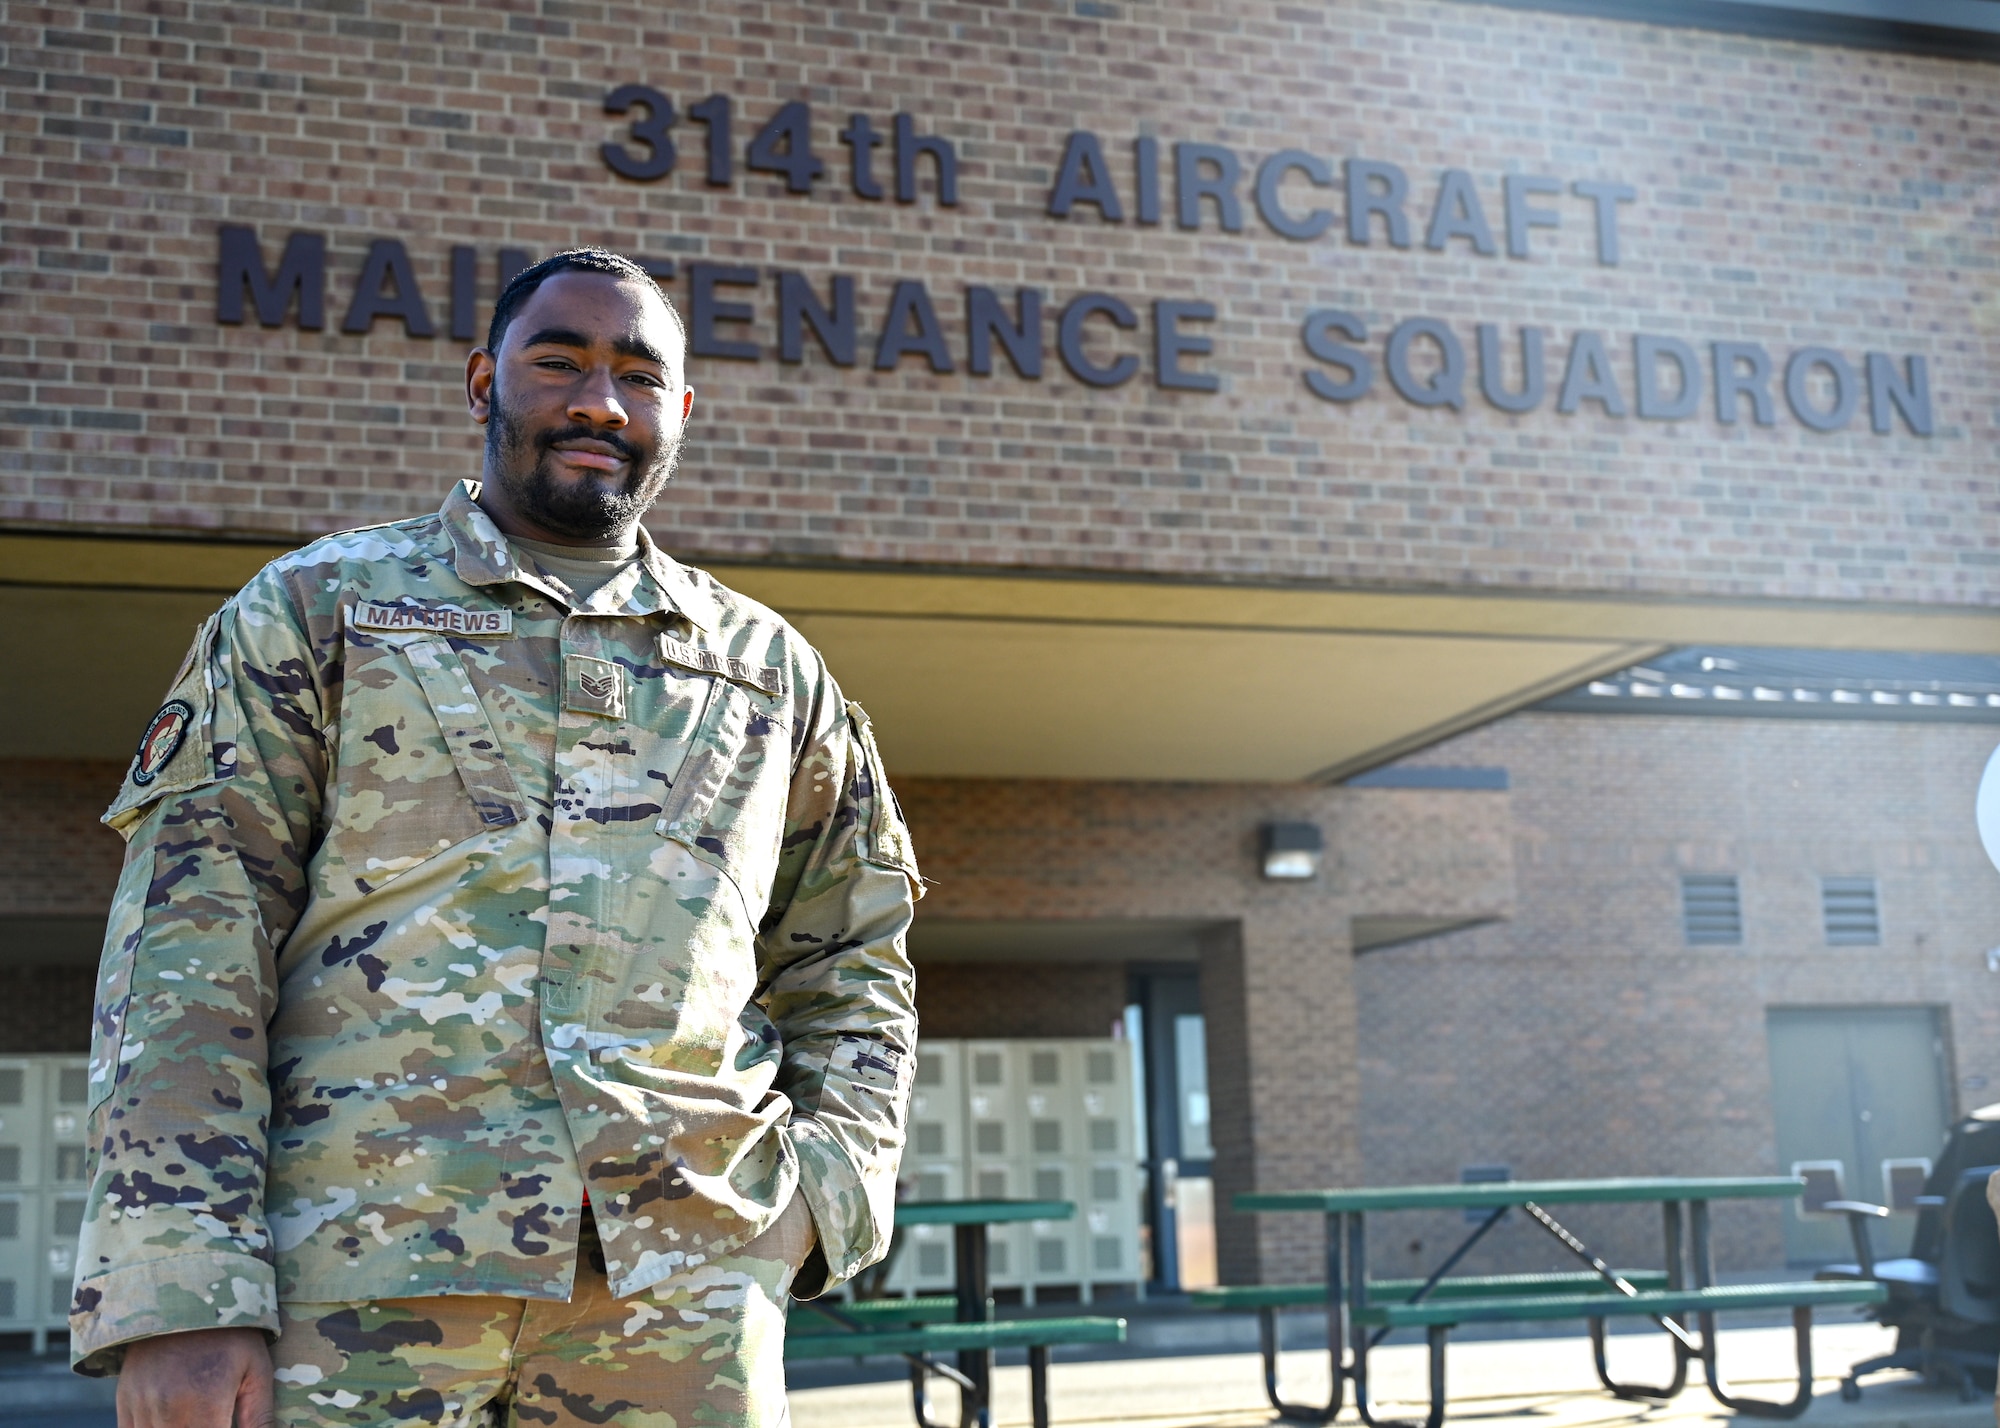 An Airman stands in front of a building.